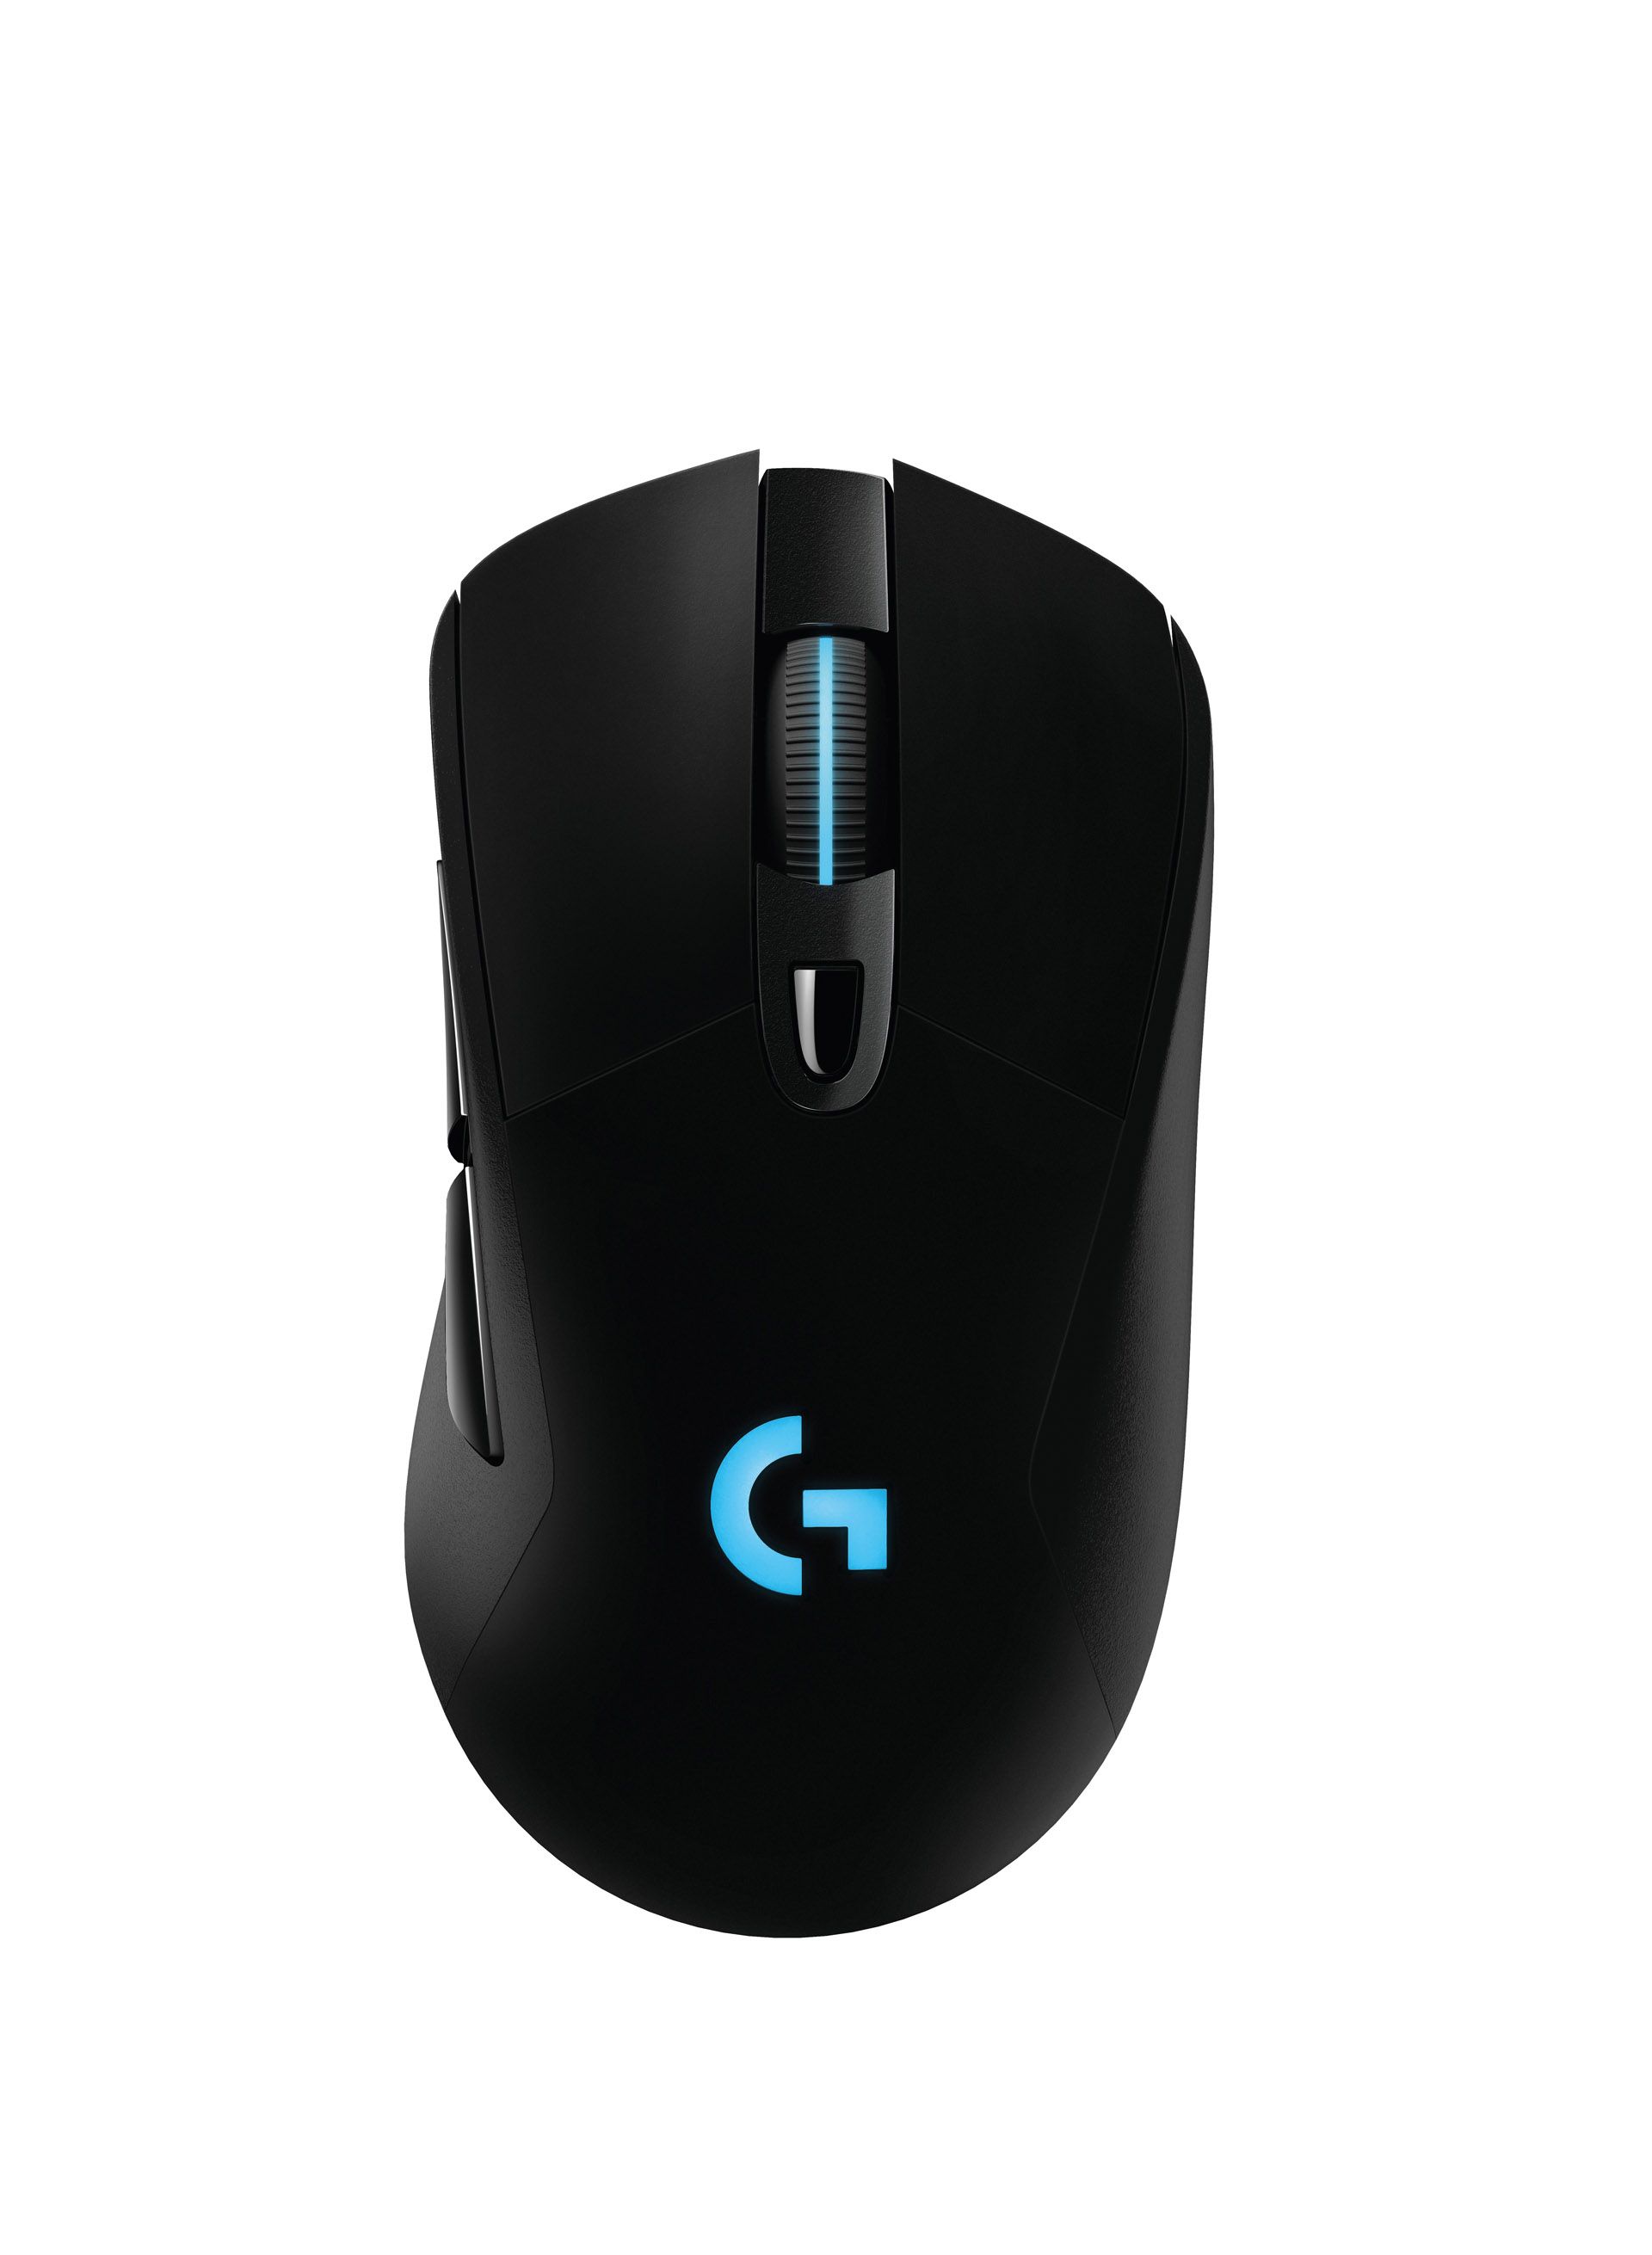 Logitech G403 Prodigy Wireless Gaming Mouse - Top View